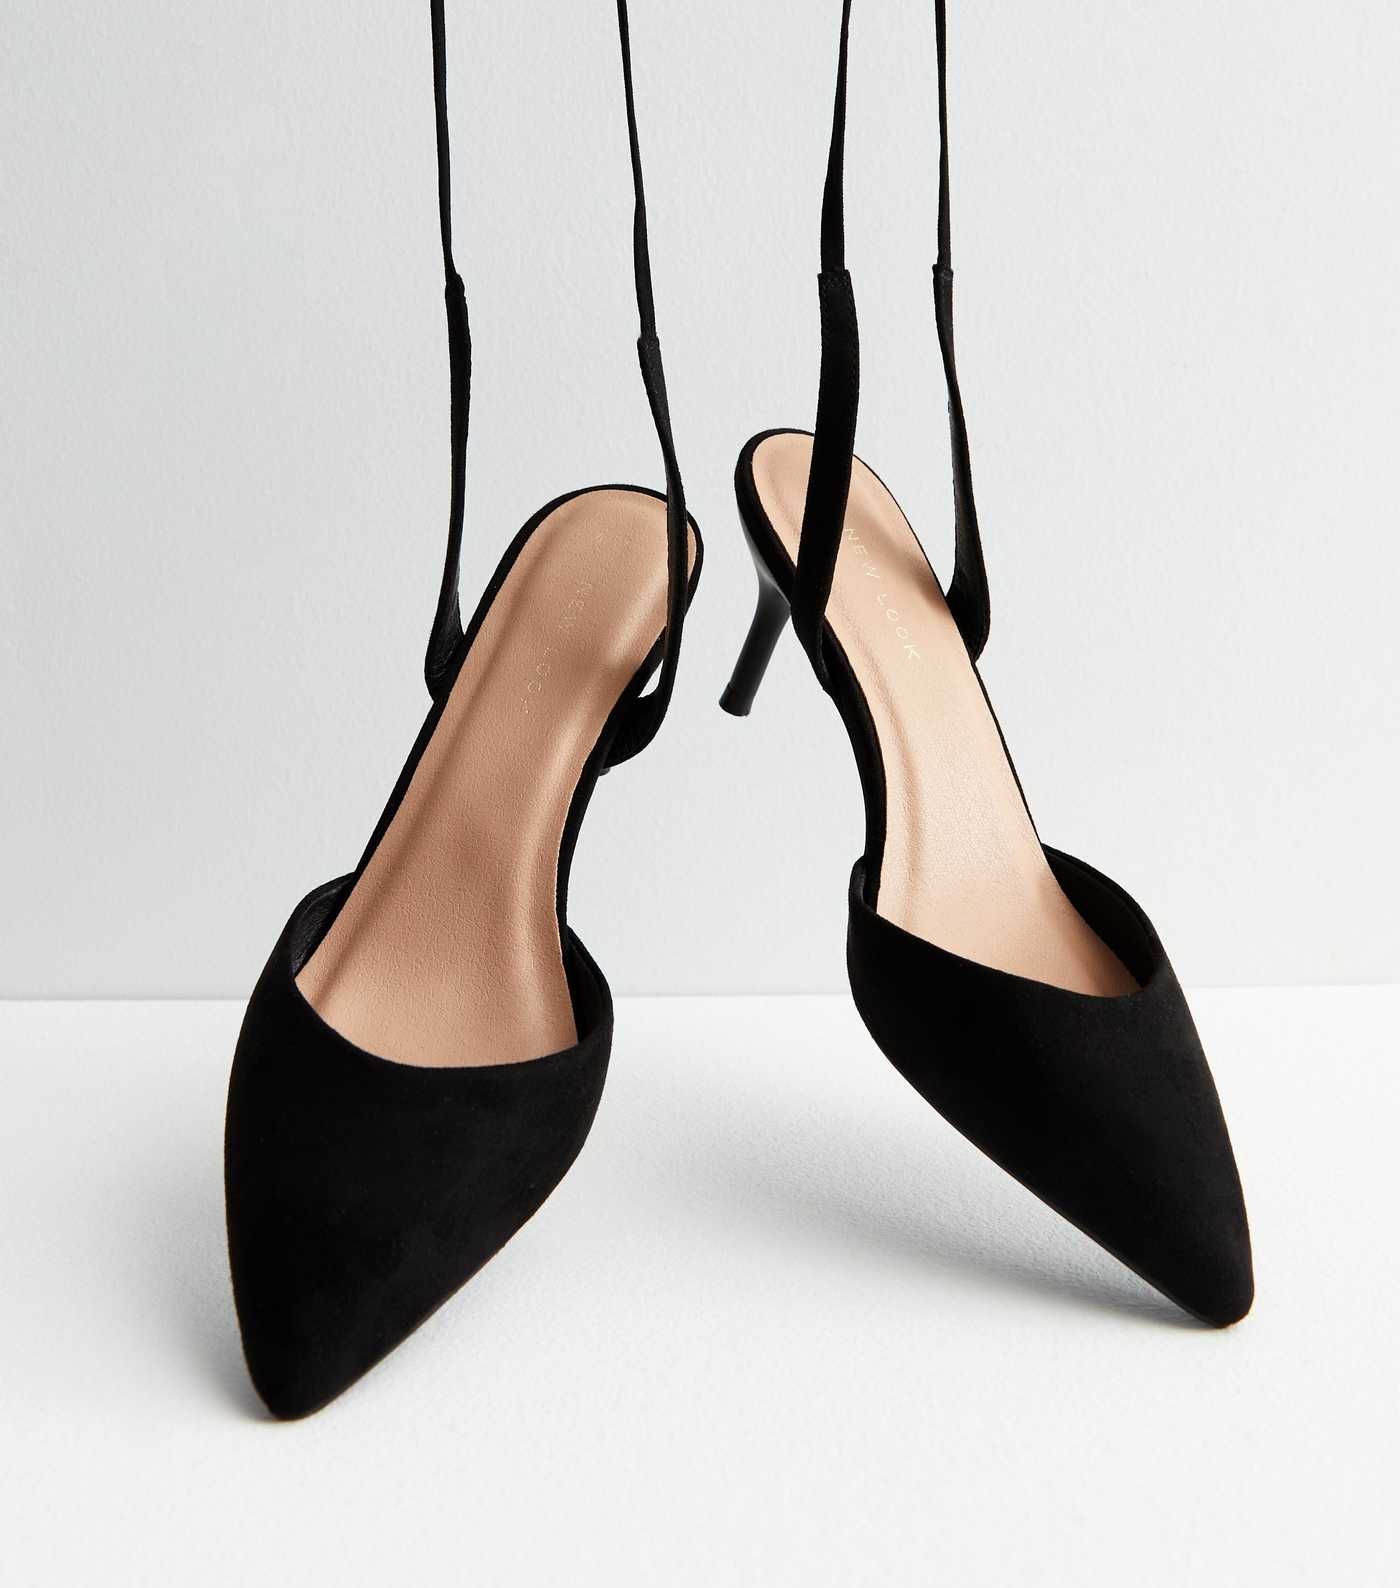 Black Suedette Ankle Tie Pointed Stiletto Heel Court Shoes
						
						Add to Saved Items
						... | New Look (UK)